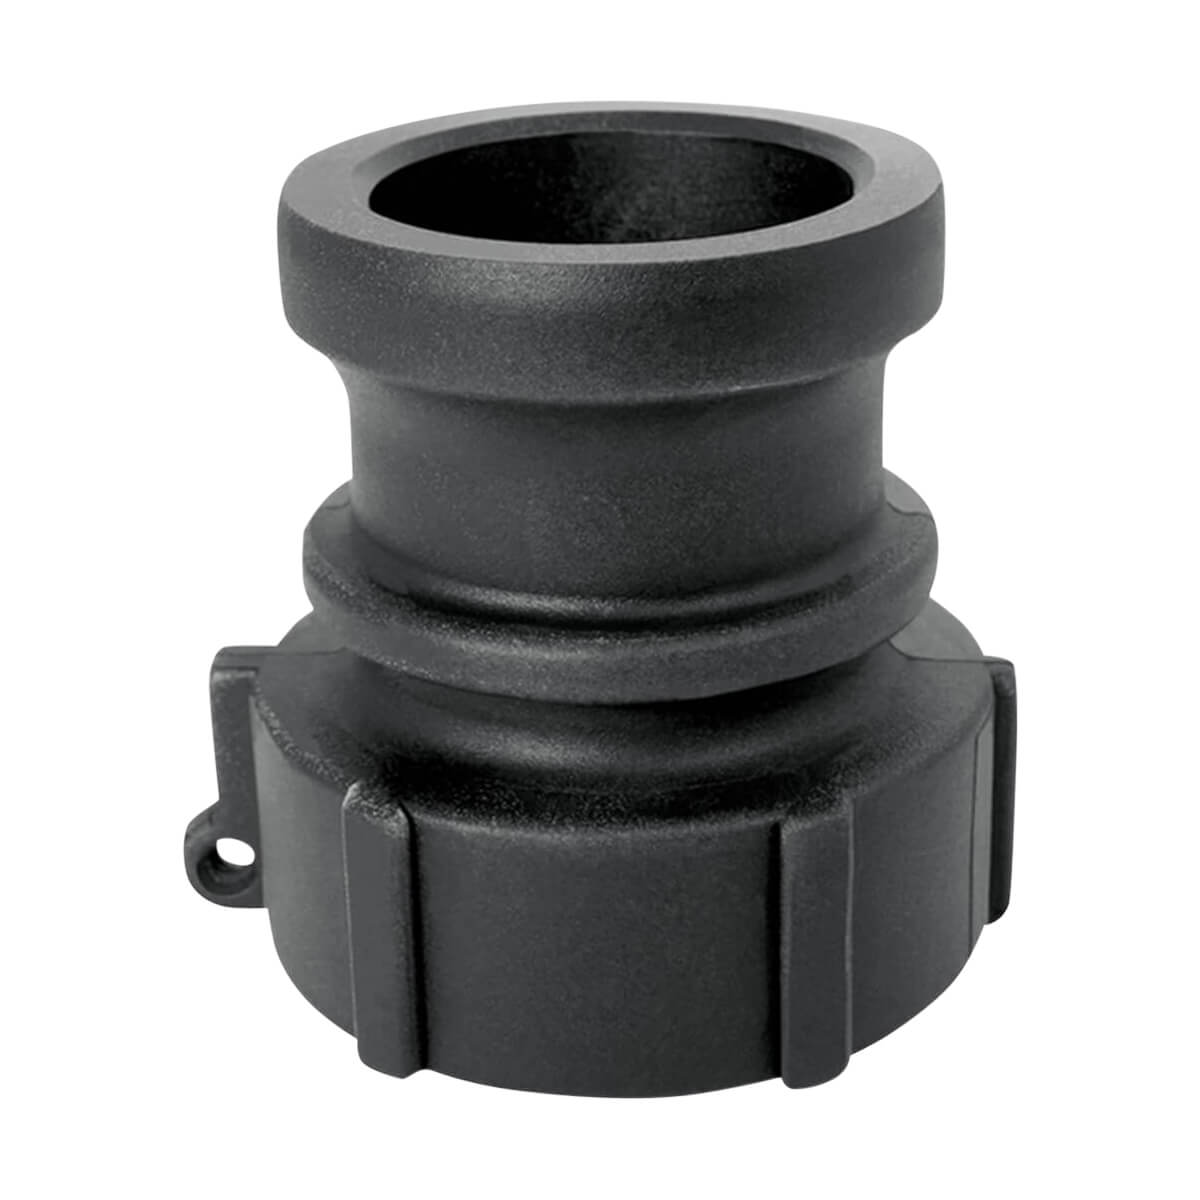 Cam Couplers A Series Male Adapter x Female NPT - M x FPT 3/4-in